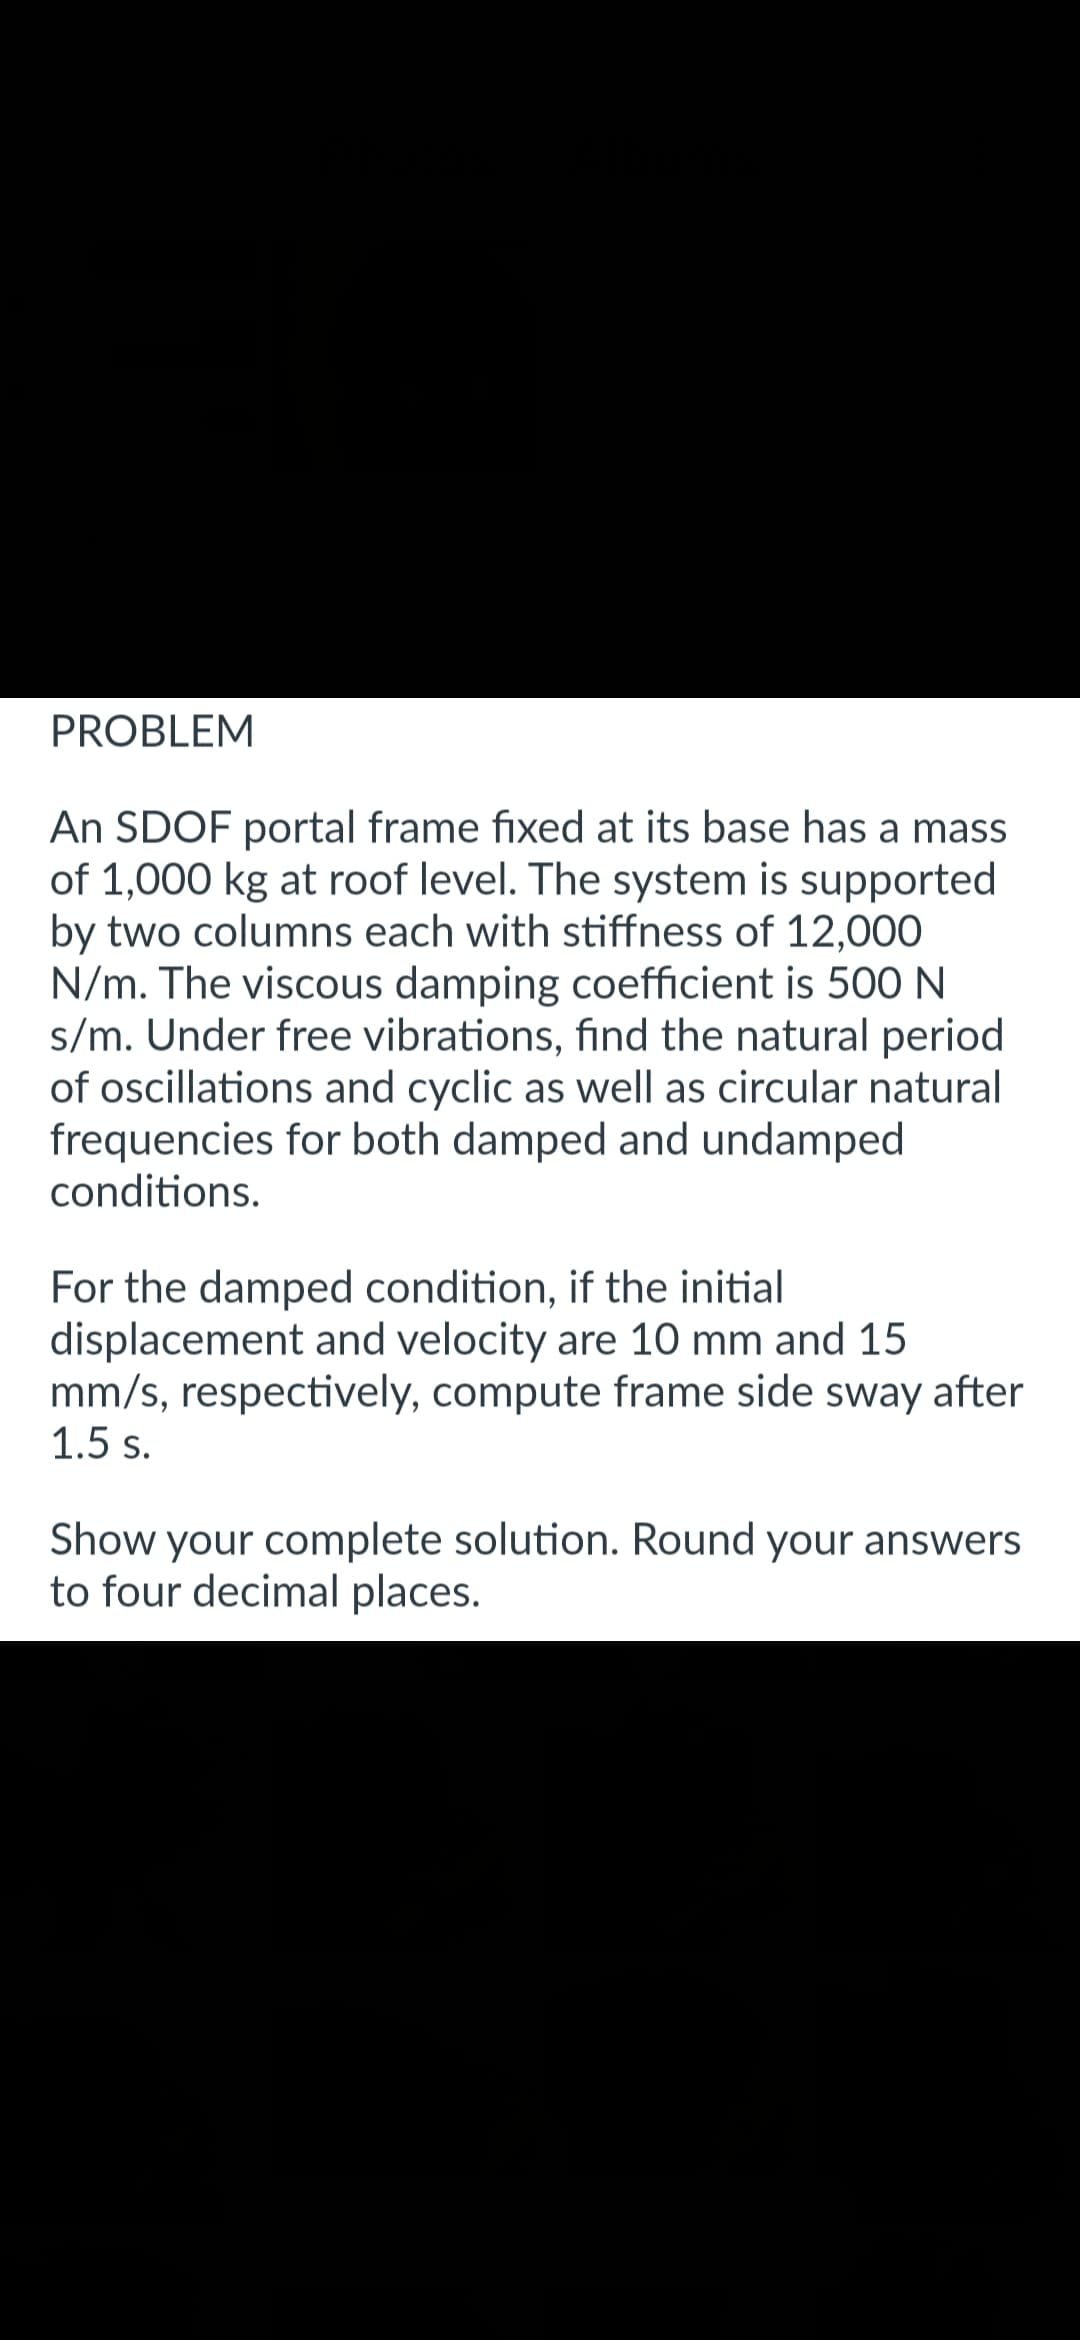 PROBLEM
An SDOF portal frame fixed at its base has a mass
of 1,000 kg at roof level. The system is supported
by two columns each with stiffness of 12,000
N/m. The viscous damping coefficient is 500 N
s/m. Under free vibrations, find the natural period
of oscillations and cyclic as well as circular natural
frequencies for both damped and undamped
conditions.
For the damped condition, if the initial
displacement and velocity are 10 mm and 15
mm/s, respectively, compute frame side sway after
1.5 s.
Show your complete solution. Round your answers
to four decimal places.